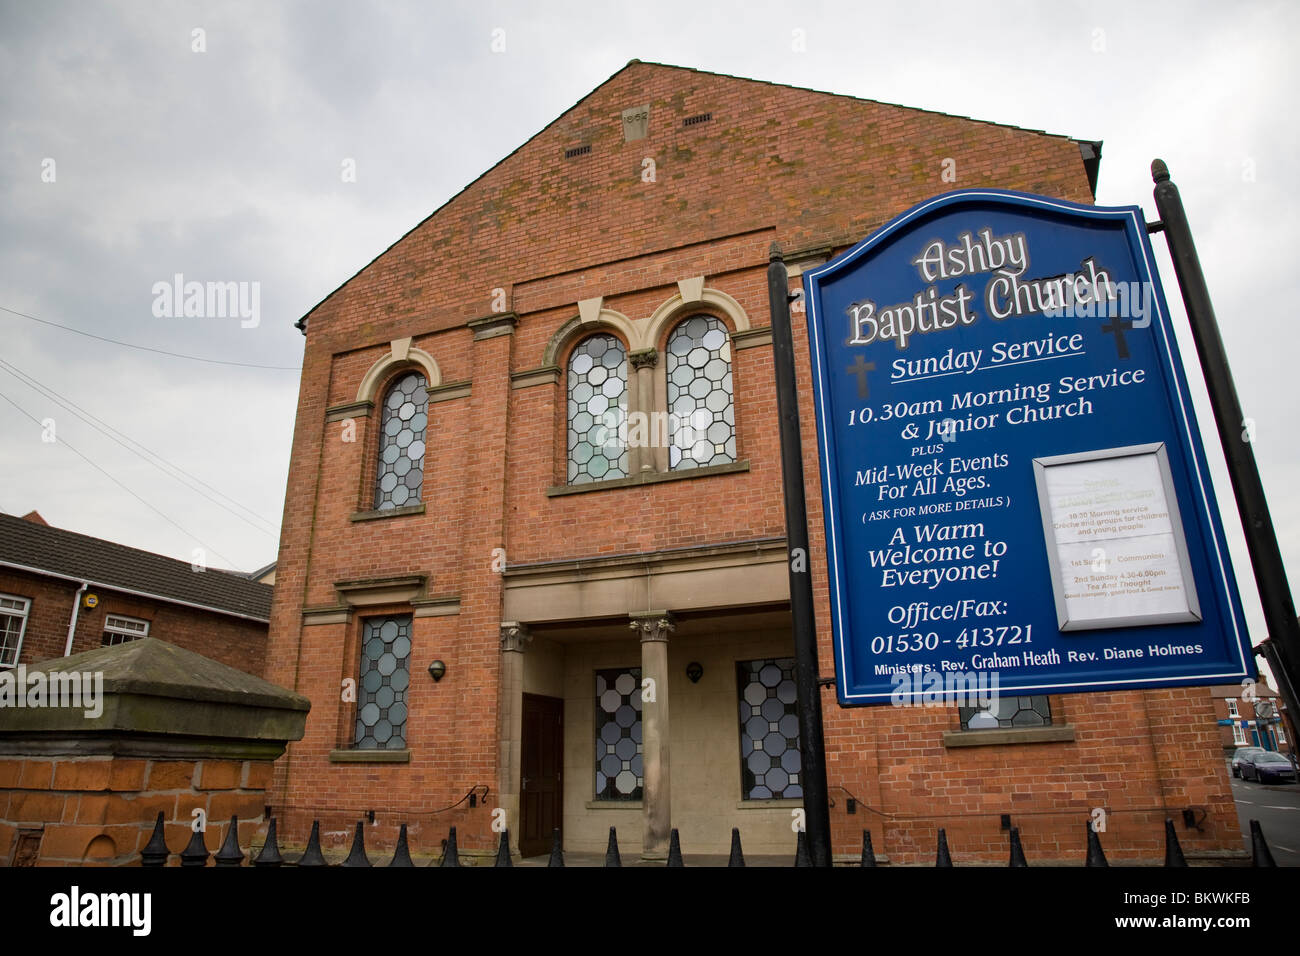 Th sign and entrance to the Ashby Baptist Church in Ashby de la Zouch, Leicestershire, England. Stock Photo